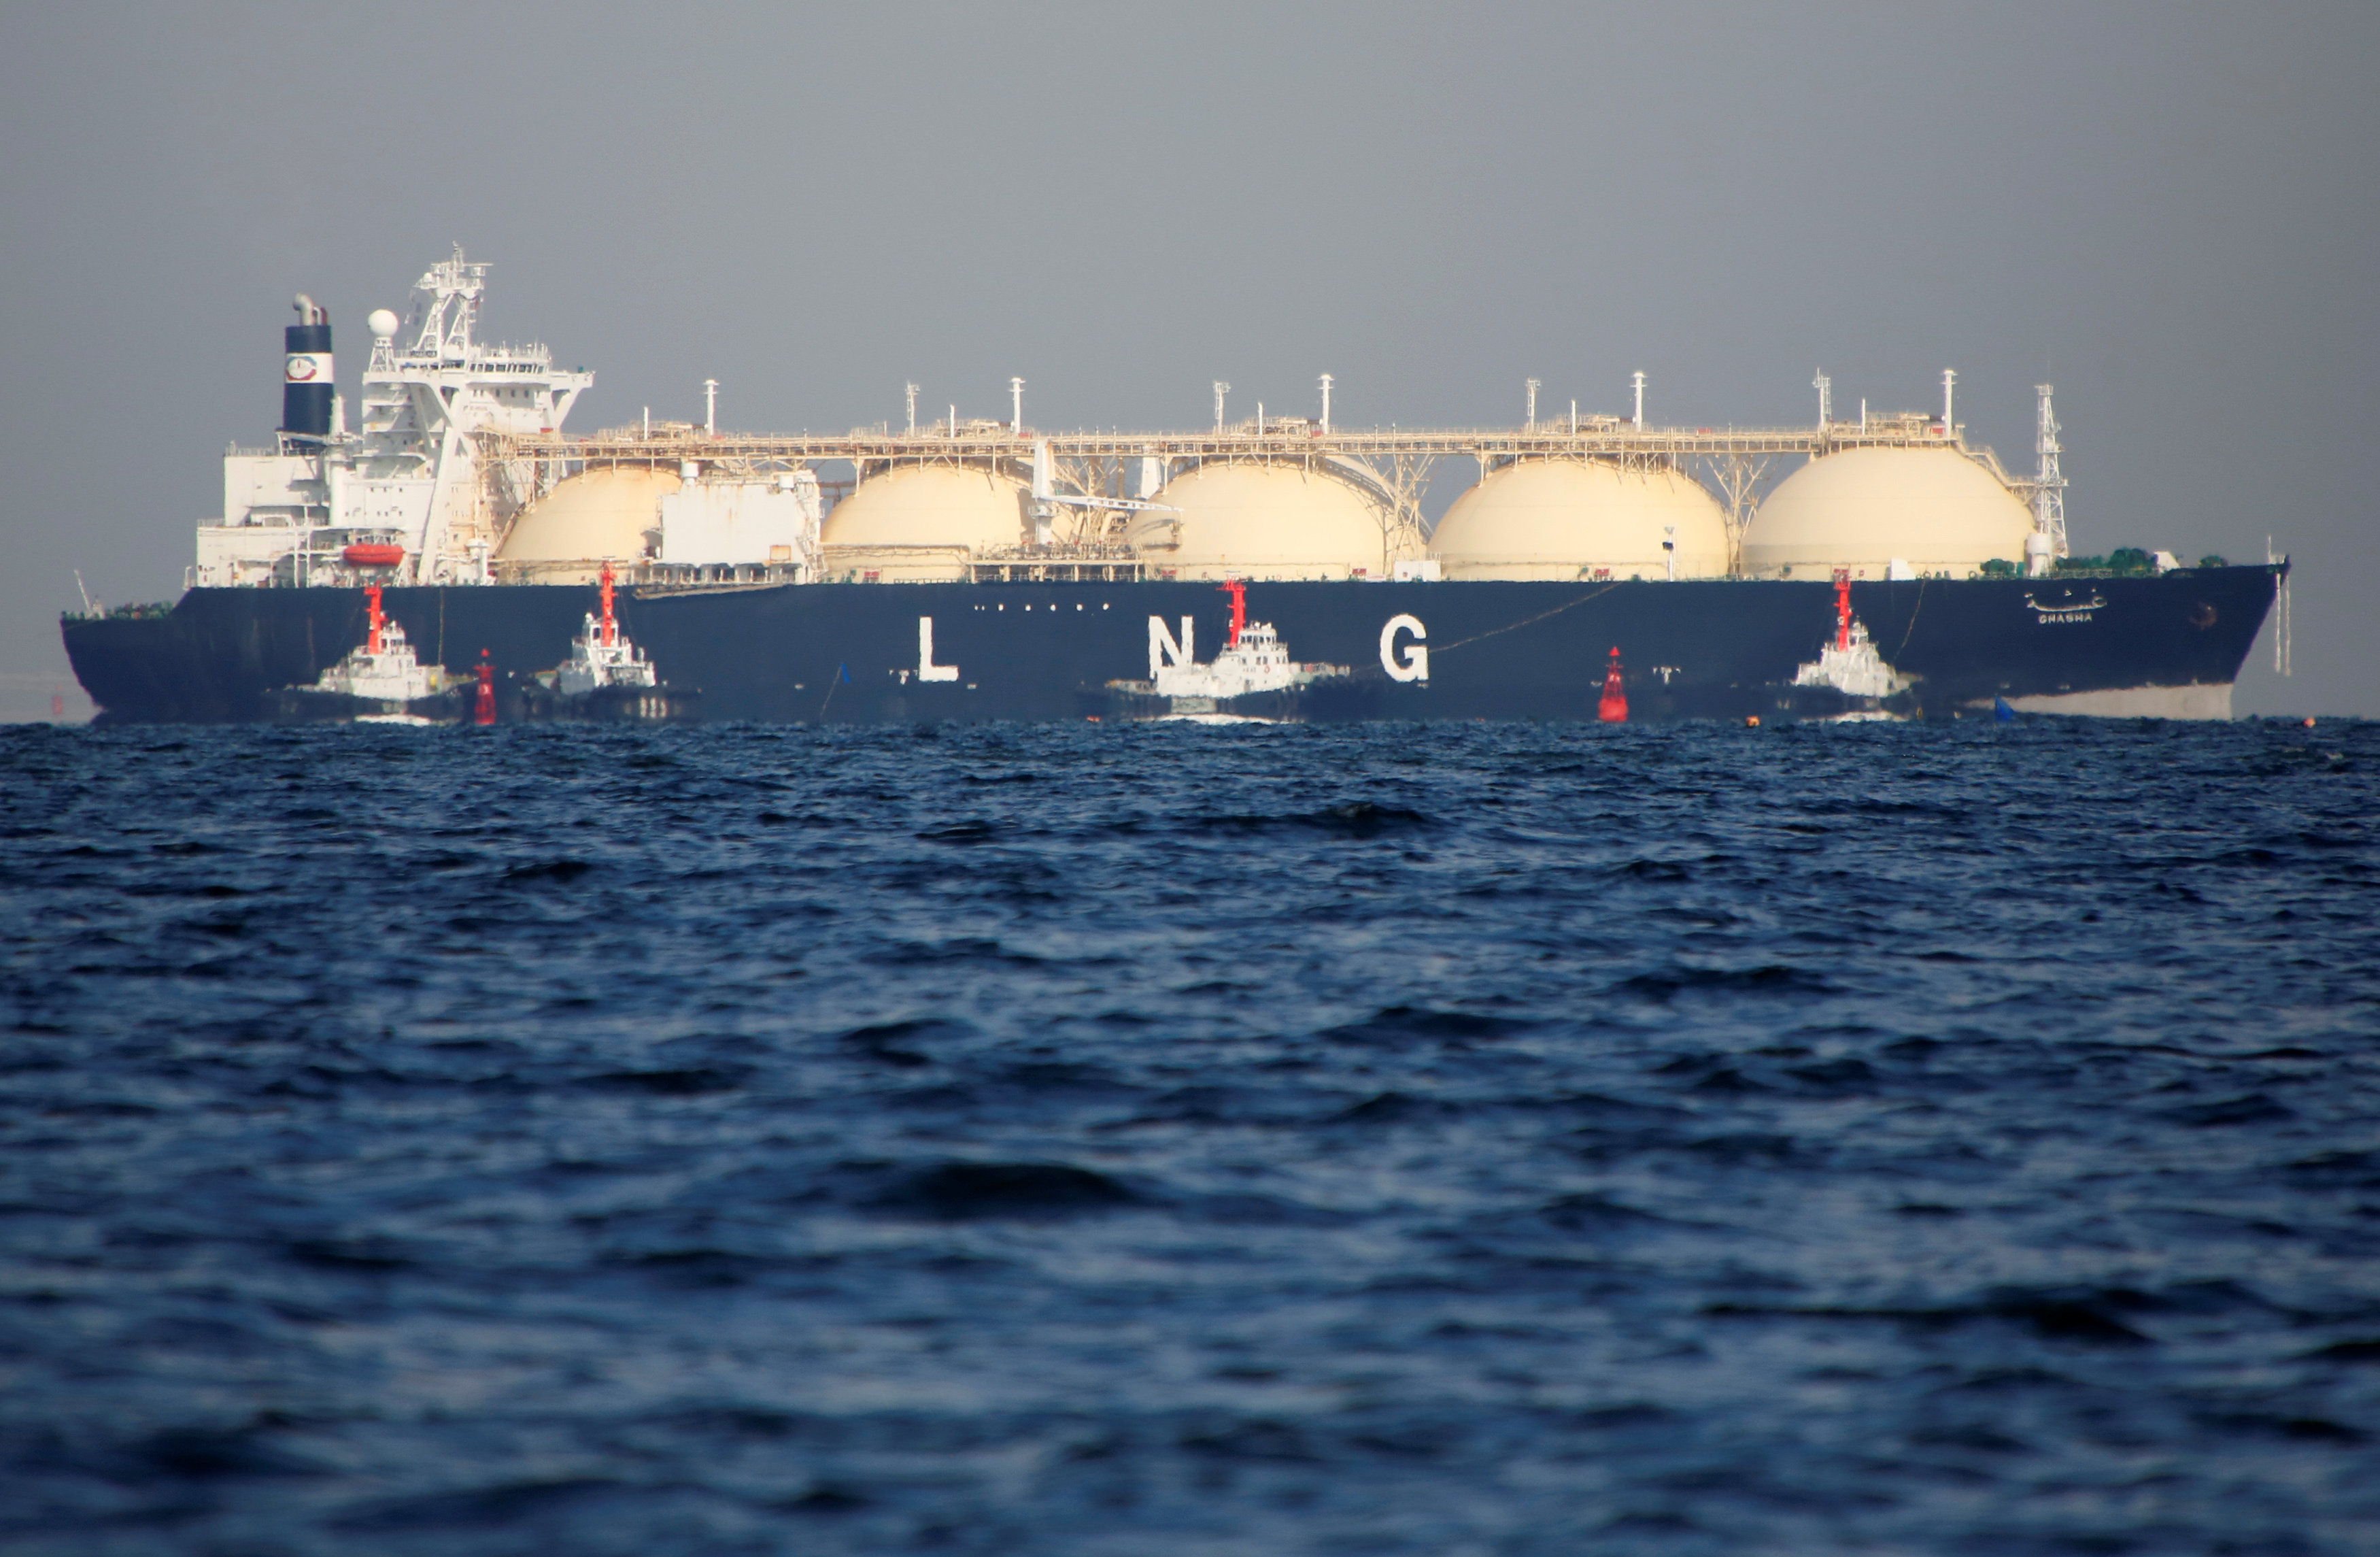 Asian buyers drive growth for global LNG trade